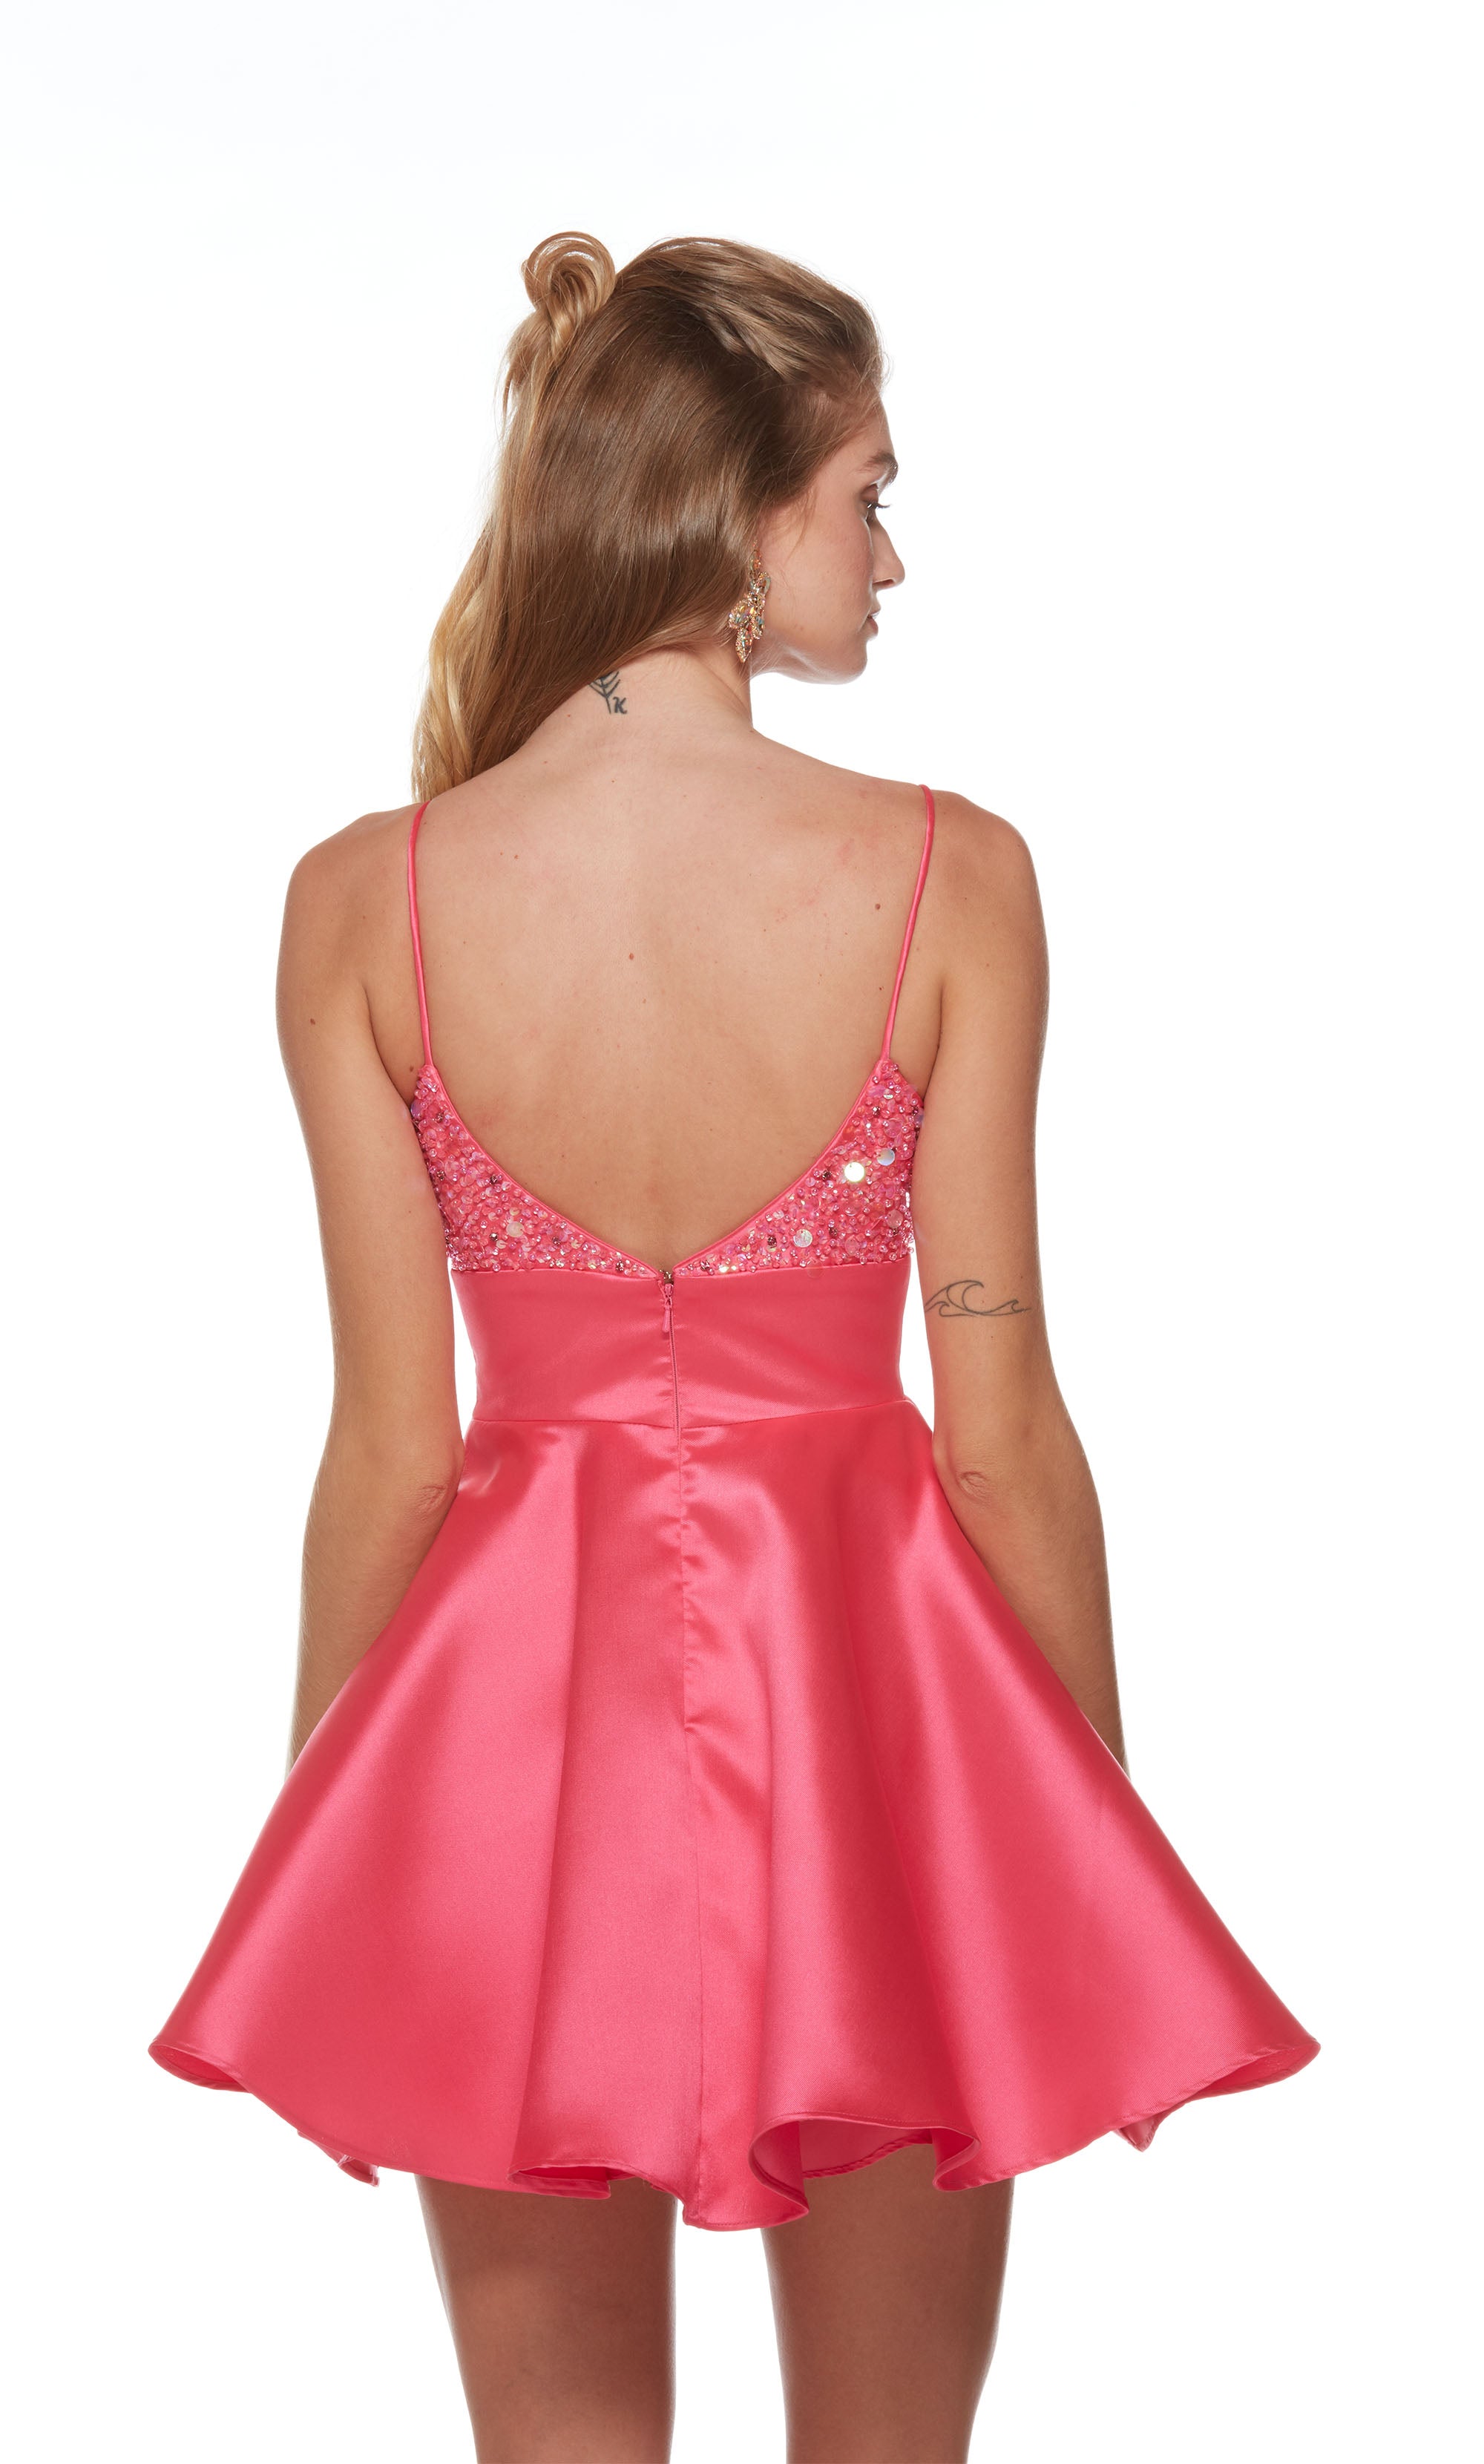 A playful hot pink homecoming dress, featuring a soft V neckline, an open V shaped back, and a flared skirt. The top of the dress is embellished with iridescent beads for a touch of sparkle.